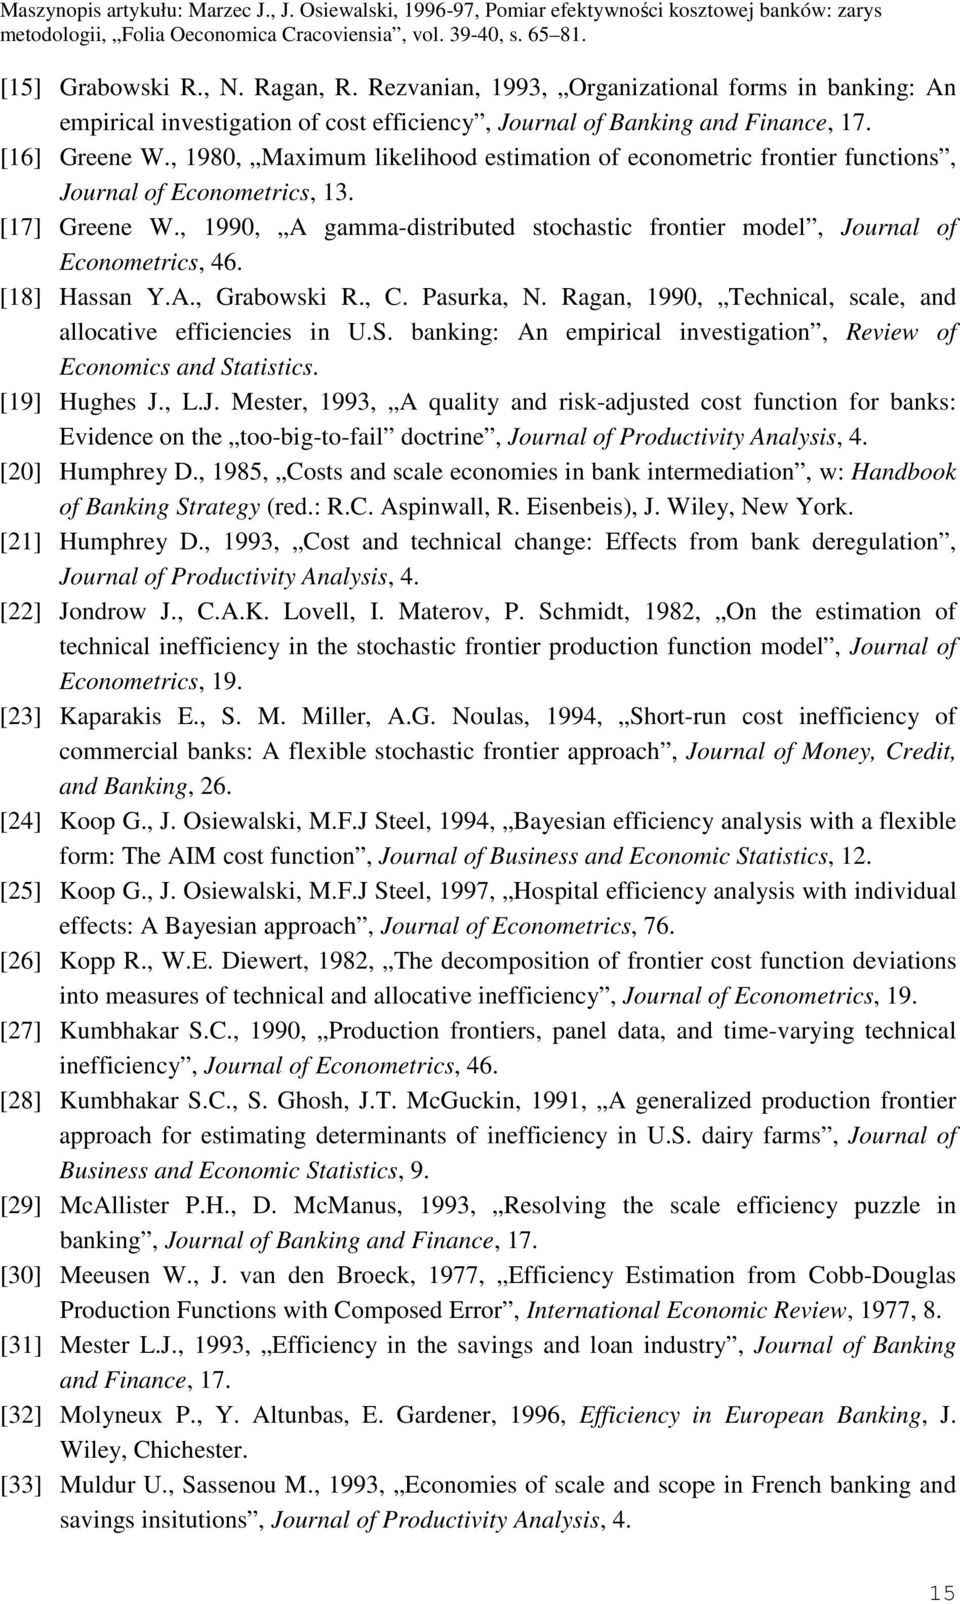 , C. Pasurka, N. Ragan, 990, Tecncal, scale, and allocatve effcences n U.S. bankng: An emprcal nvestgaton, Revew of Economcs and Statstcs. [9] Huges J.